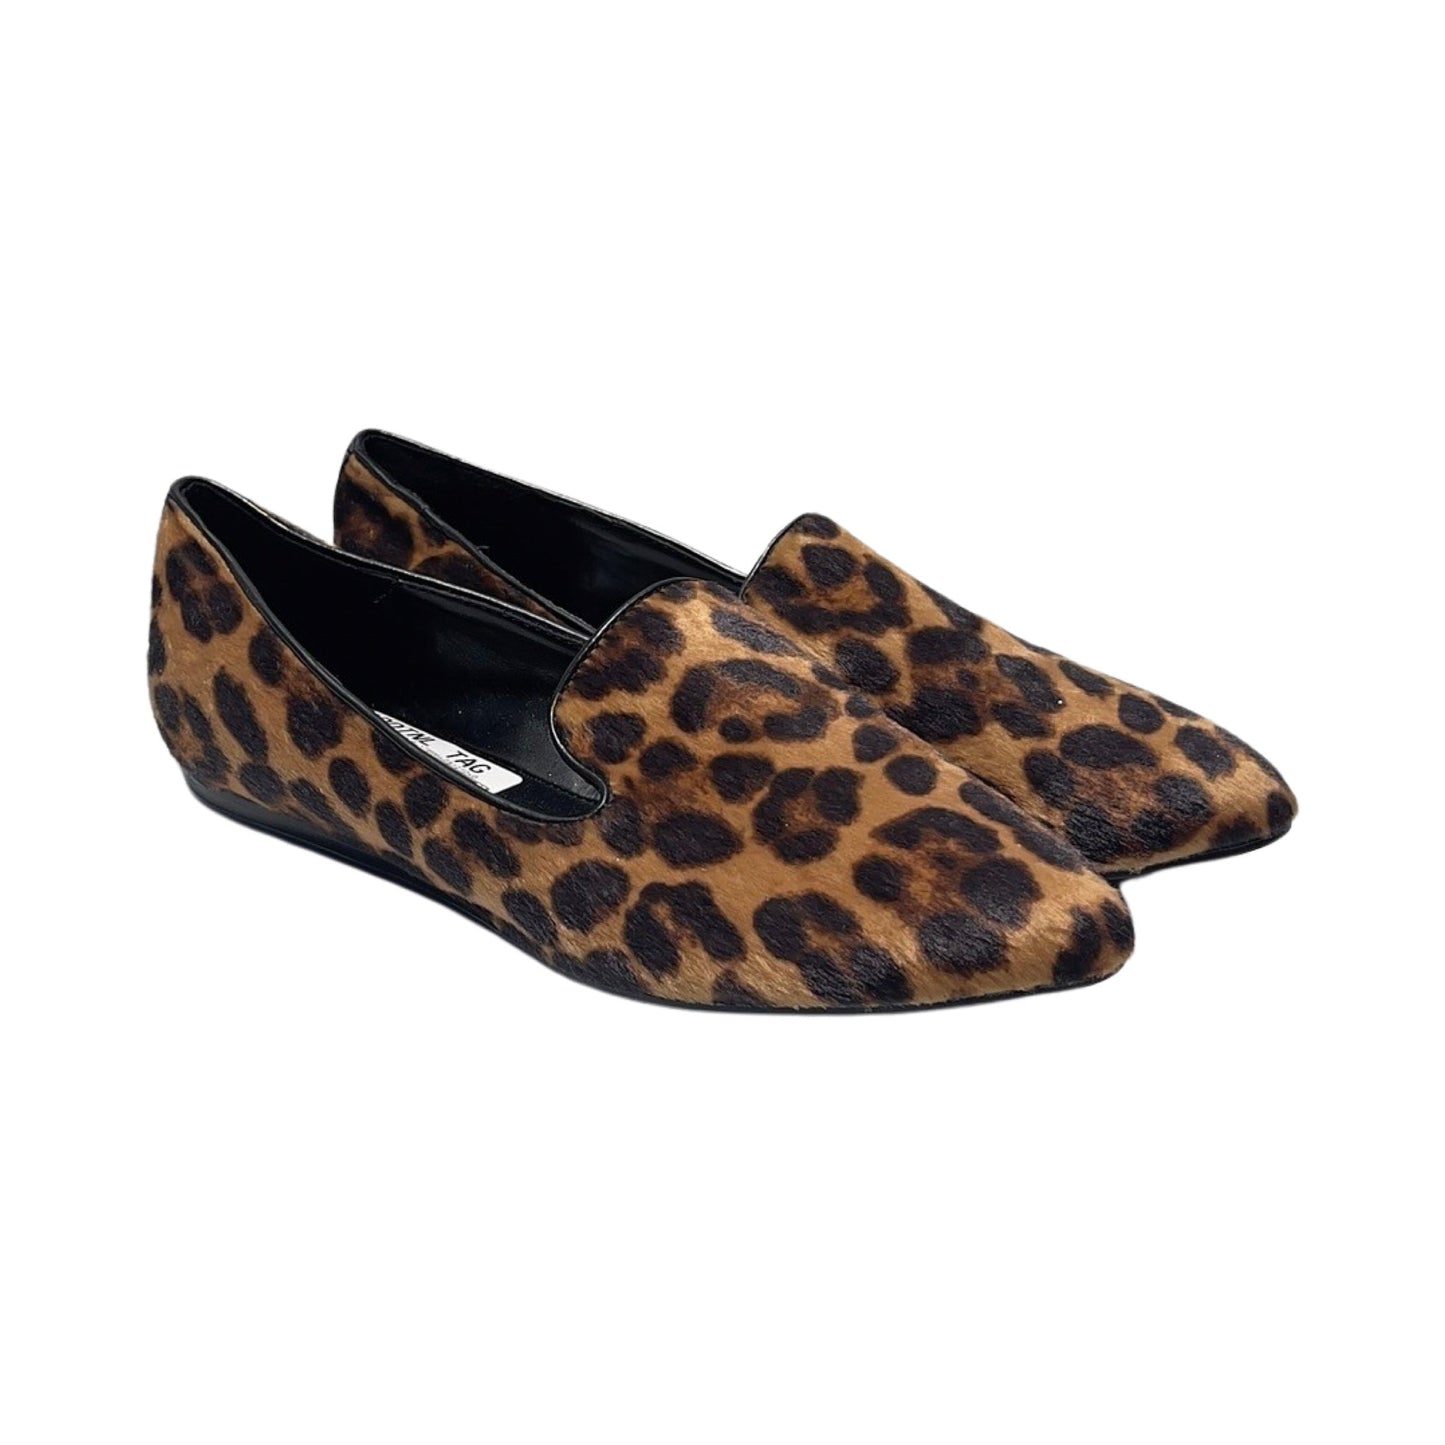 Shoes Flats Loafer Oxford By Nine West Apparel  Size: 8